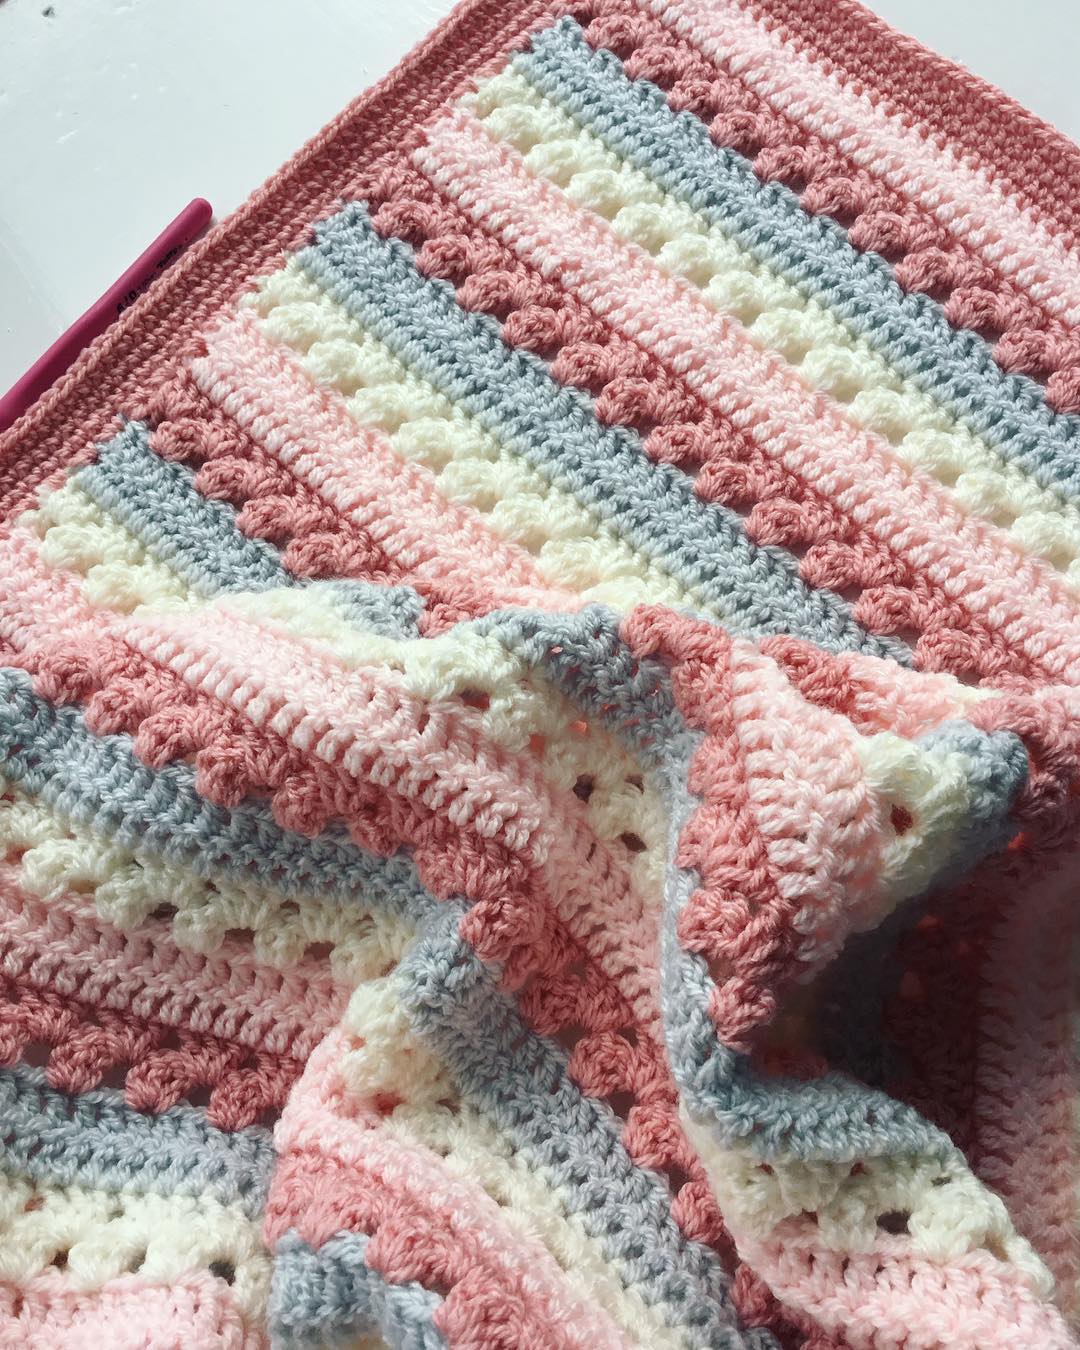 Free Crochet Baby Blanket Patterns for Beginners 2019  Page 20 of 42  Crochet Blog 